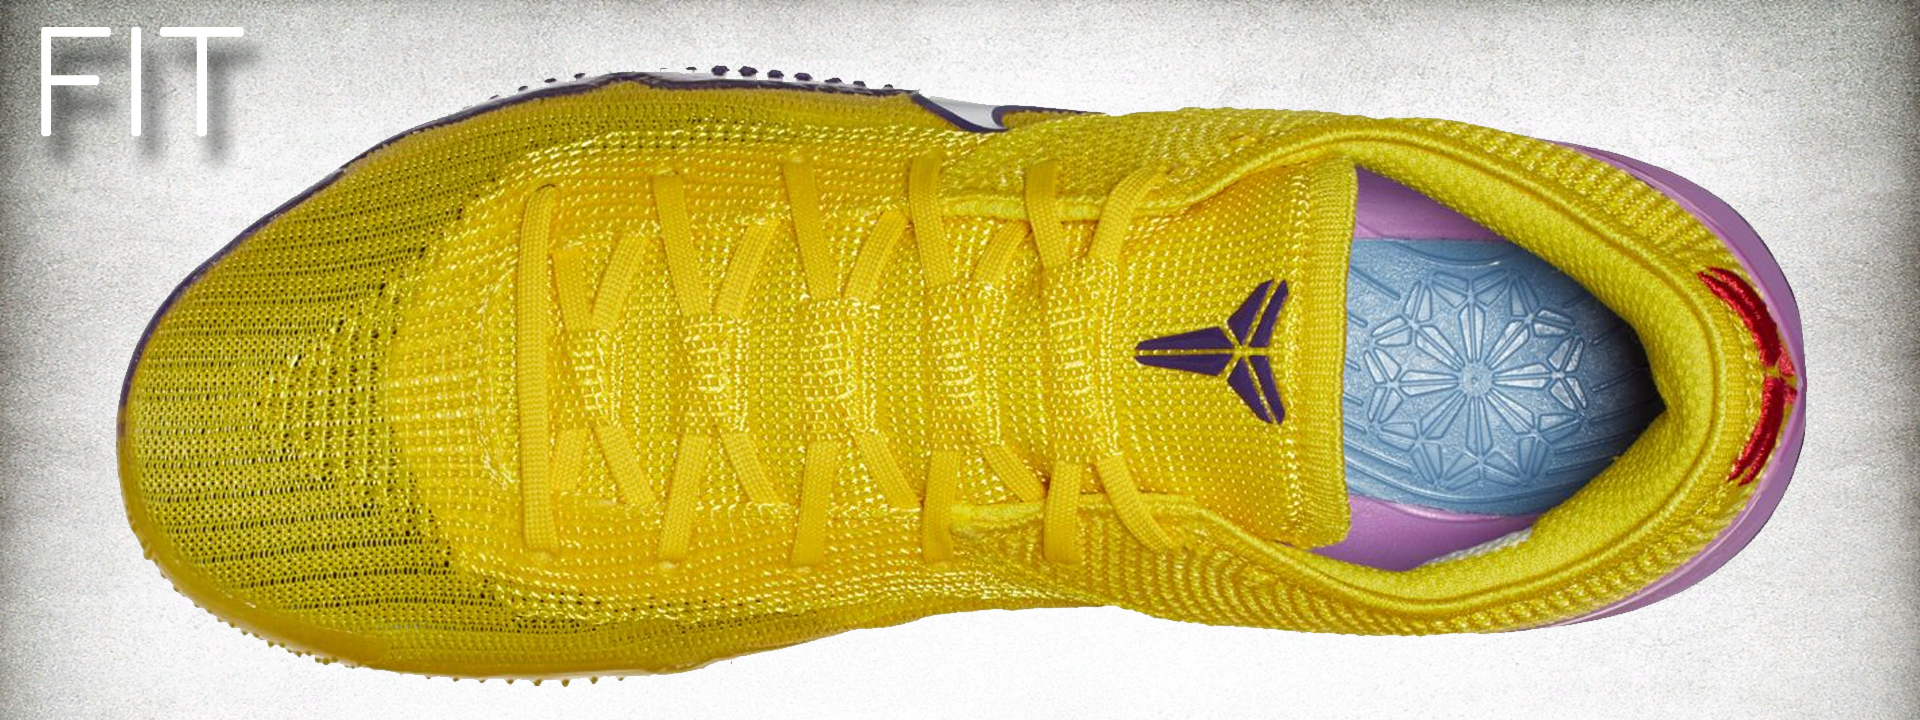 Nike Kobe NXT 360 performance review fit